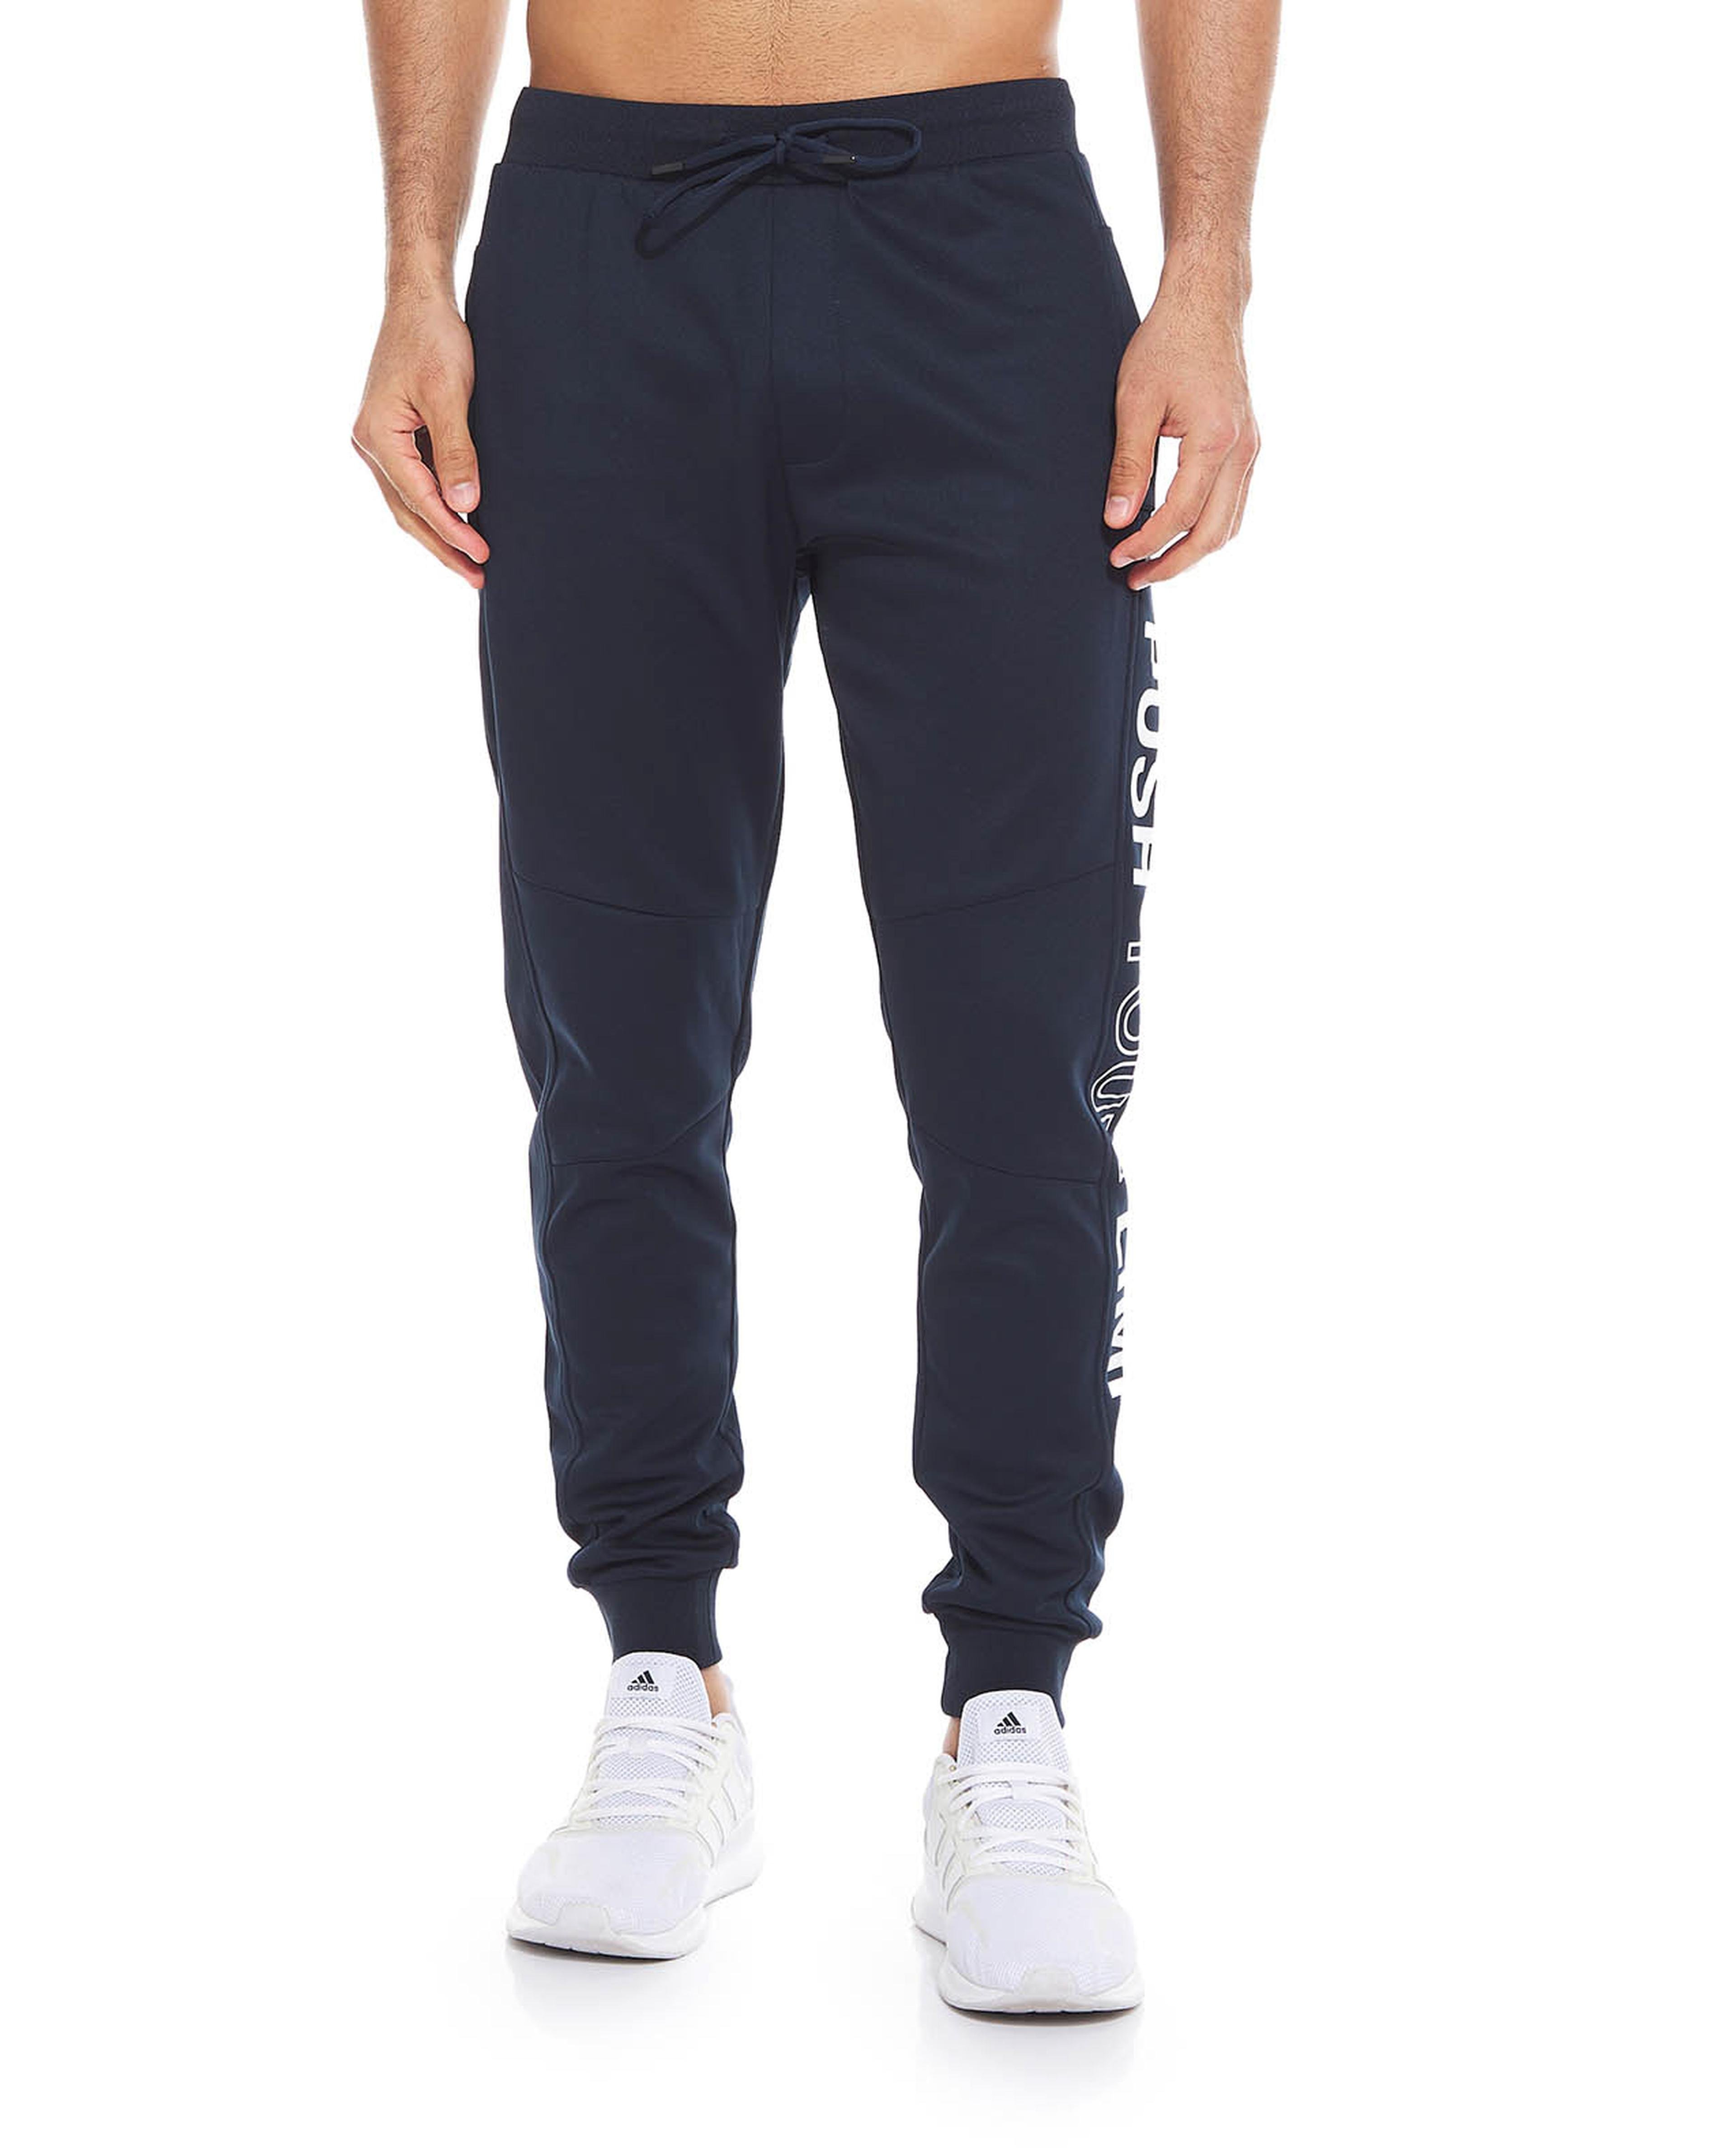 Printed Joggers with Drawstring Waist